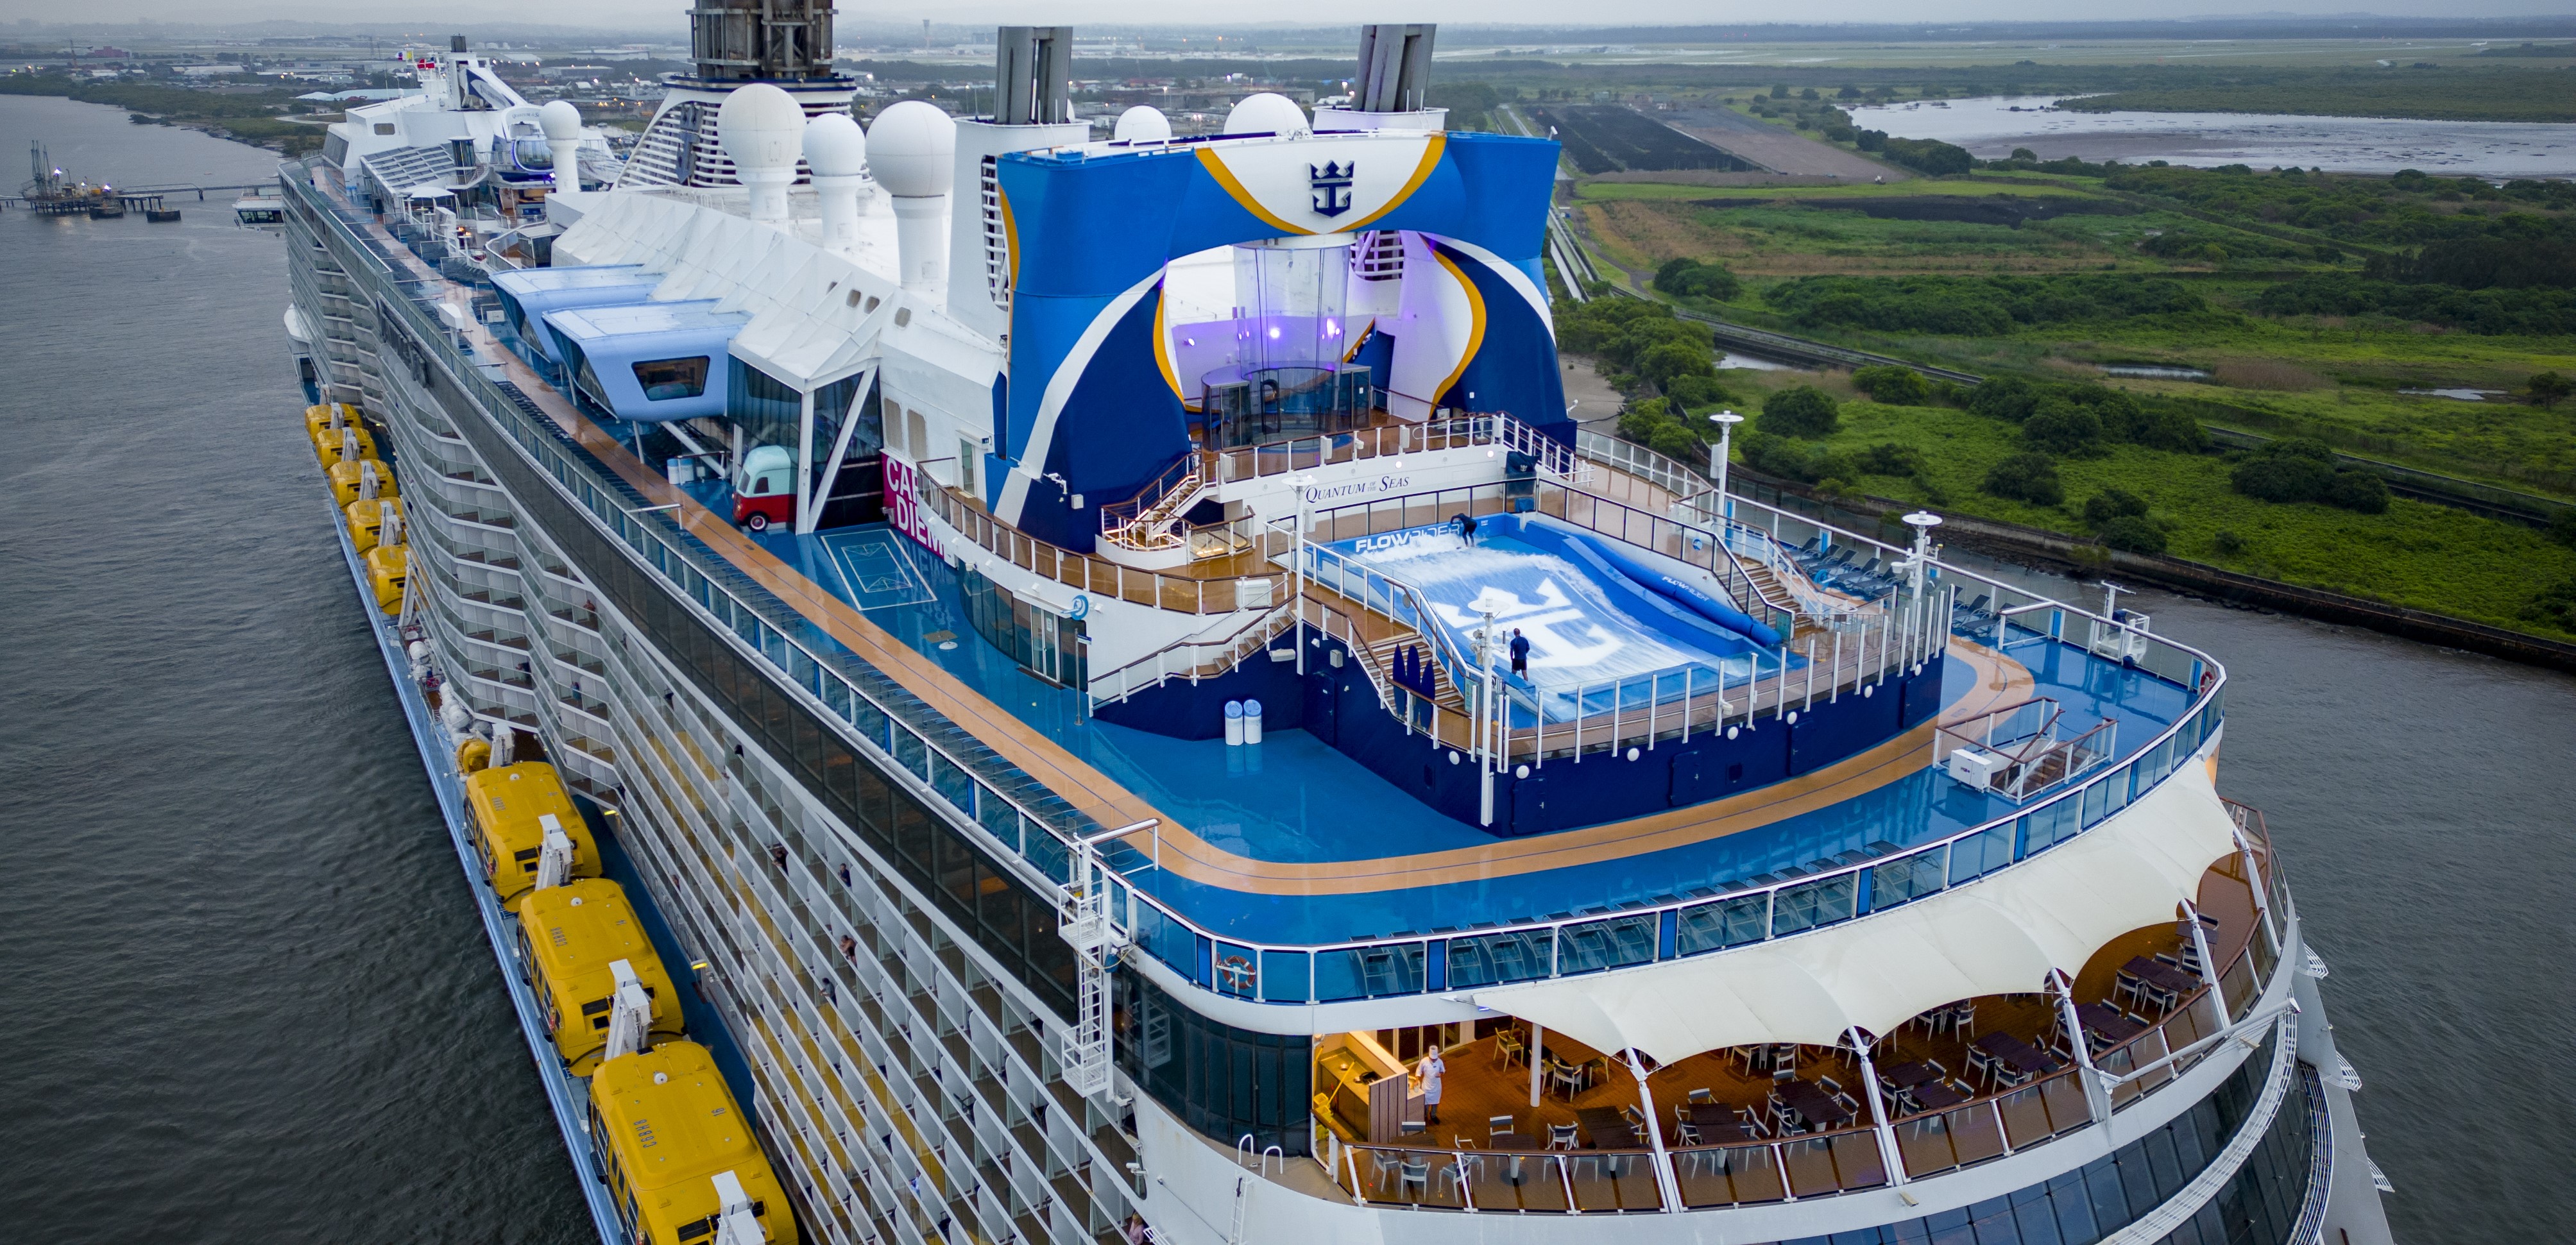 G’DAY BRISBANE ROYAL CARIBBEAN SETS SAIL FROM QUEENSLAND FOR FIRST